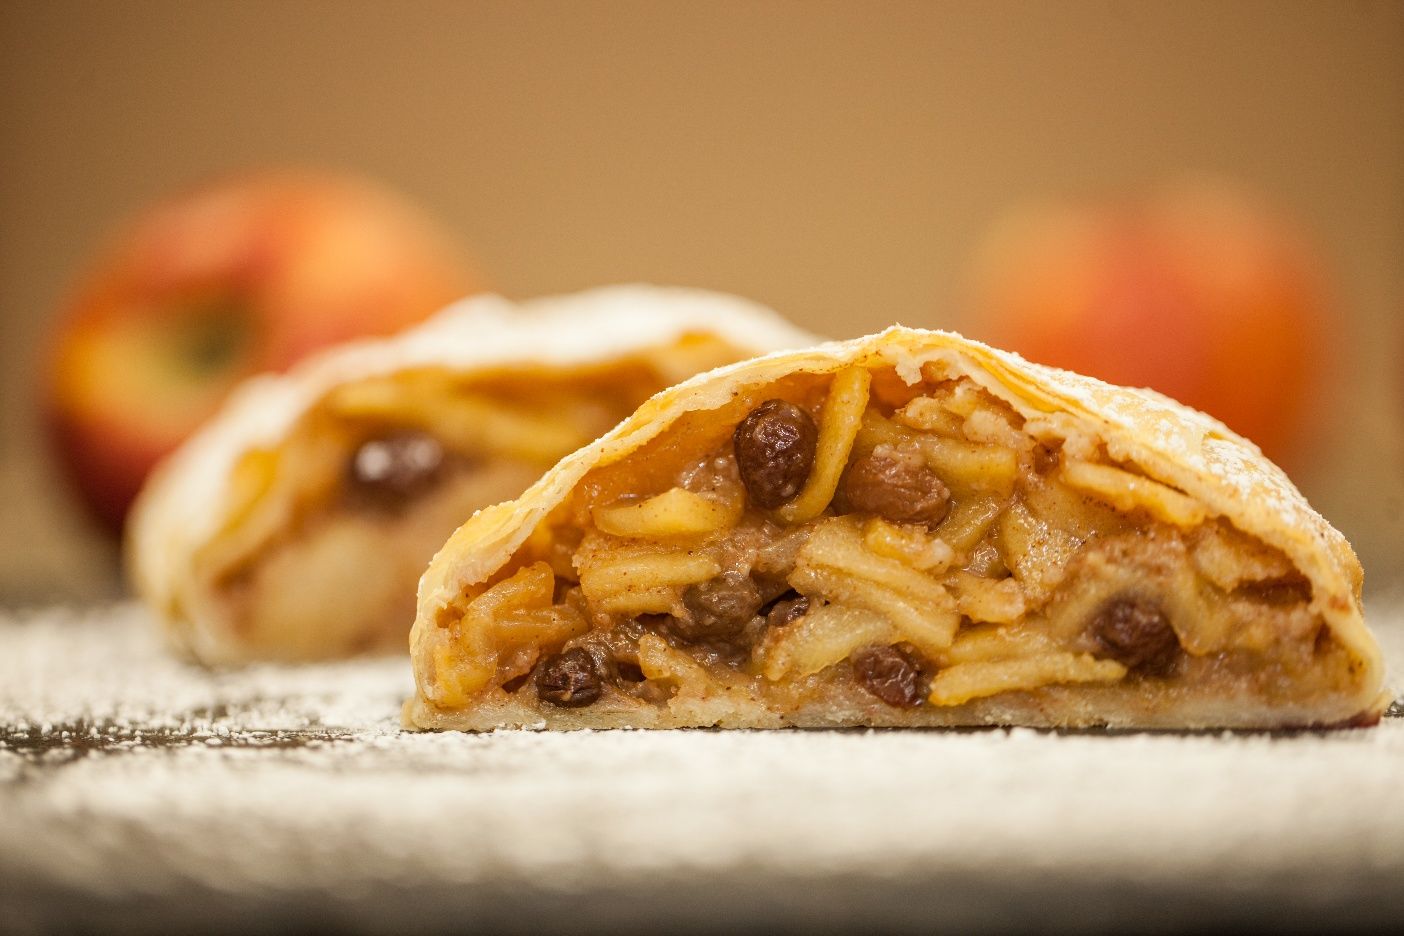 "Little Austria was started in 2017 with the idea to bring traditional Austrian strudels made with high quality local ingredients to market," Gallent said. (Courtesy Little Austria)